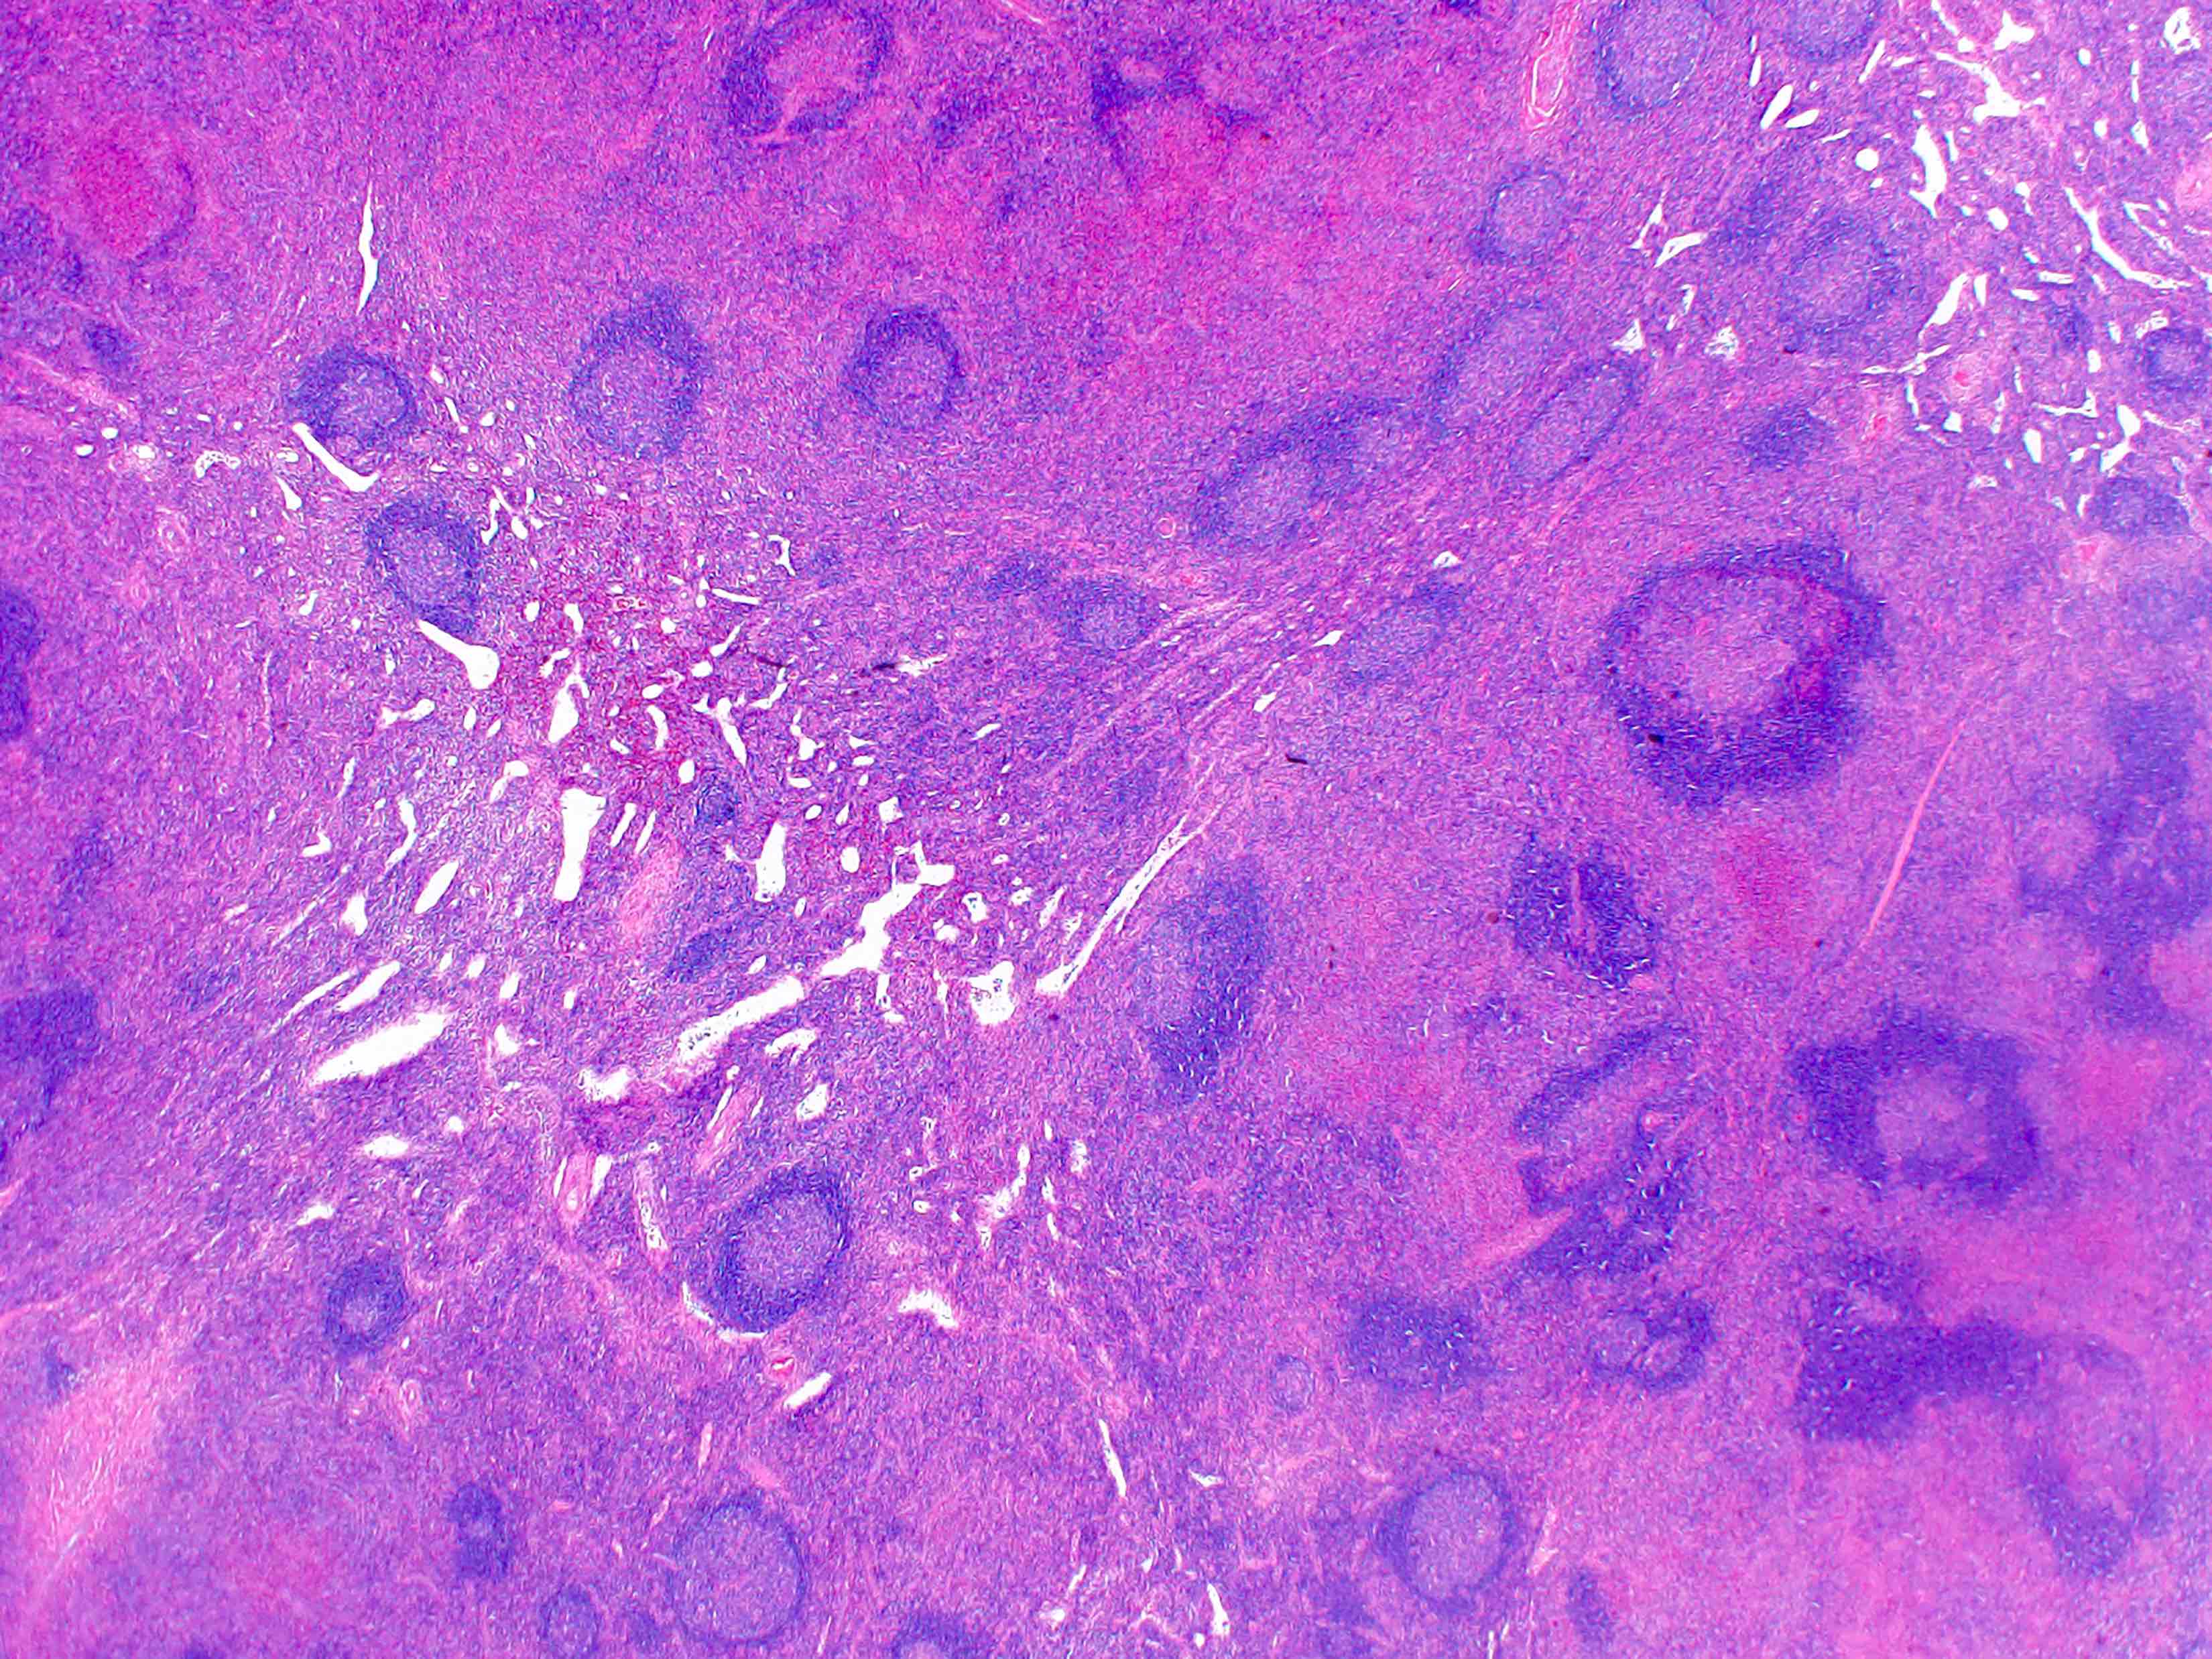 Excisional biopsy of lymph node